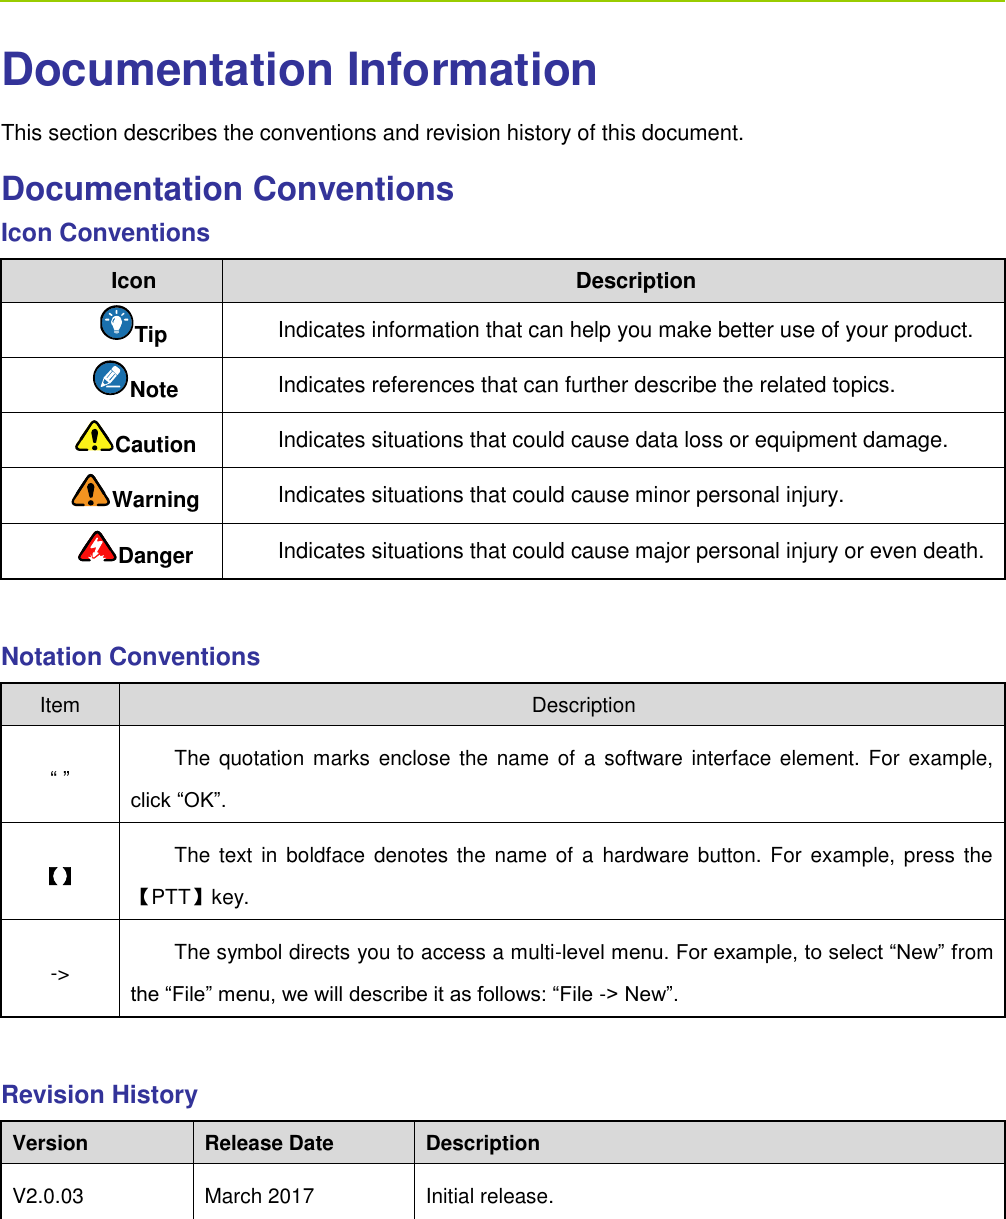      Documentation Information This section describes the conventions and revision history of this document.   Documentation Conventions Icon Conventions Icon Description Tip Indicates information that can help you make better use of your product. Note   Indicates references that can further describe the related topics.   Caution Indicates situations that could cause data loss or equipment damage. Warning Indicates situations that could cause minor personal injury. Danger Indicates situations that could cause major personal injury or even death.    Notation Conventions Item Description “ ” The quotation marks  enclose  the name  of a software interface element.  For example, click “OK”. 【】 The text  in boldface  denotes  the  name of a hardware button. For example,  press the 【PTT】key.   -&gt; The symbol directs you to access a multi-level menu. For example, to select “New” from the “File” menu, we will describe it as follows: “File -&gt; New”.  Revision History Version Release Date Description V2.0.03 March 2017 Initial release.    